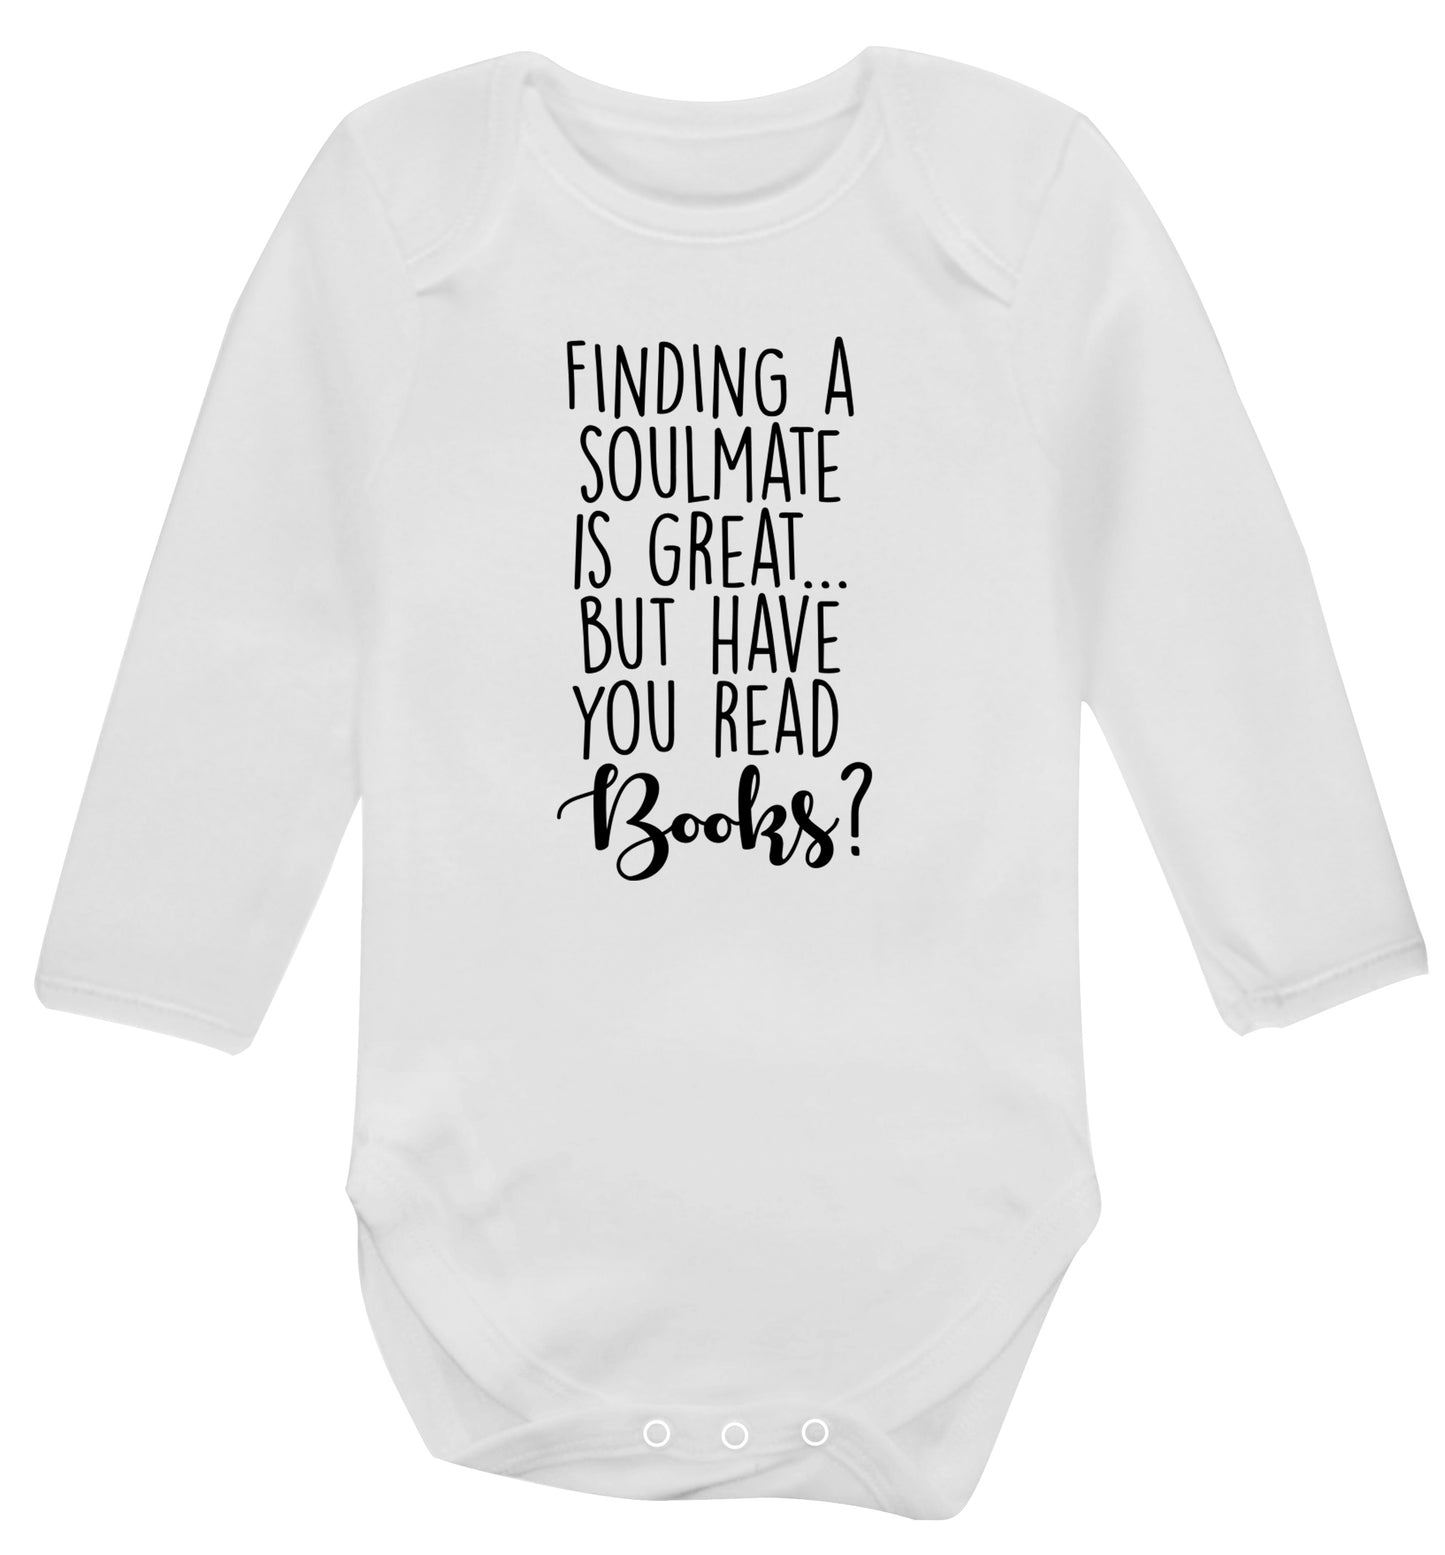 Finding a soulmate is great but have you read books? Baby Vest long sleeved white 6-12 months